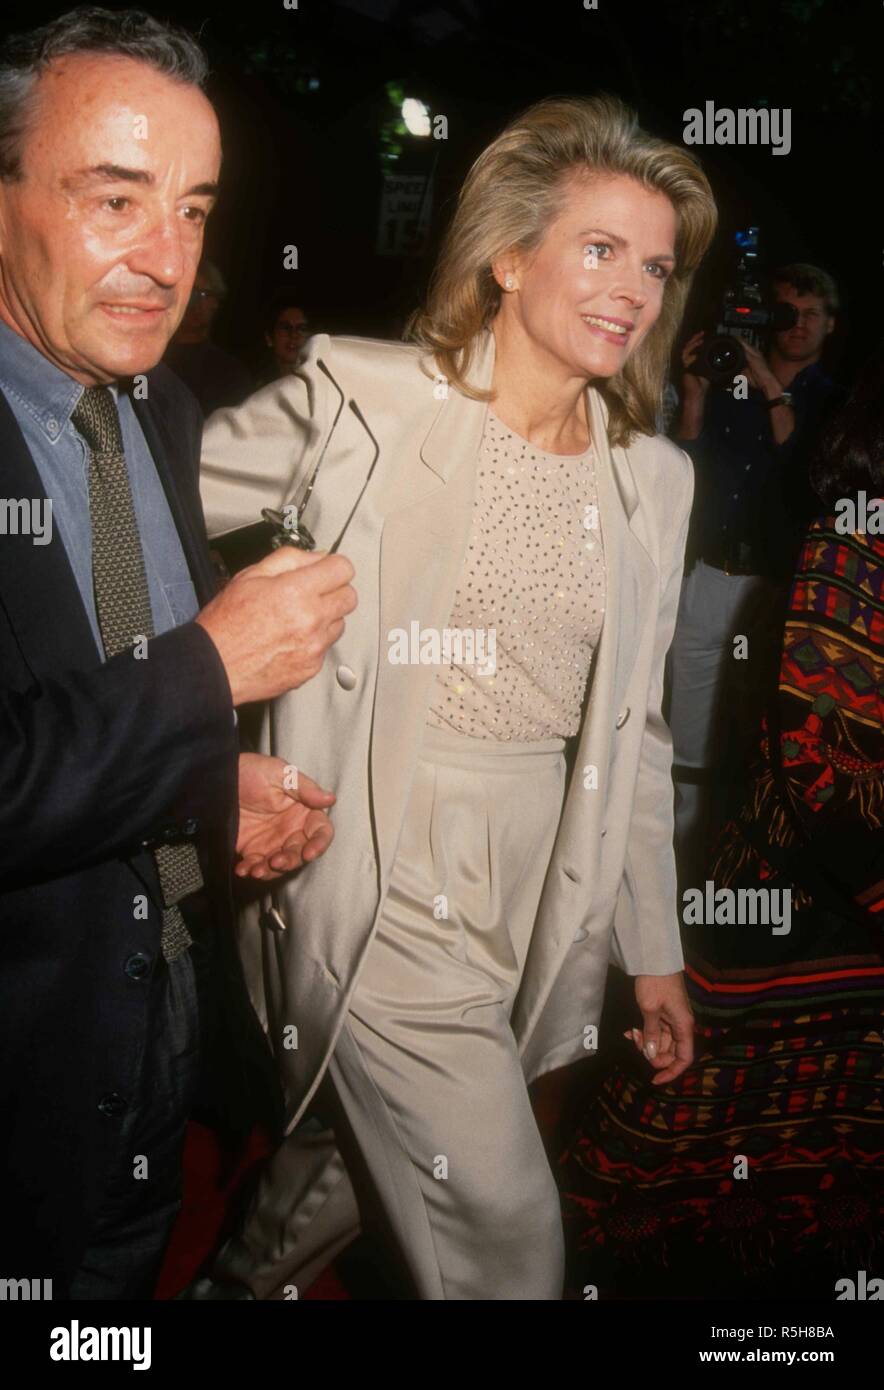 UNIVERSAL CITY, CA - MARCH 9: Director Louis Malle and wife actress Candice Bergen attend the 19th Annual People's Choice Awards on March 9, 1993 at Unversal Studios in Universal City, California. Photo by Barry King/Alamy Stock Photo Stock Photo